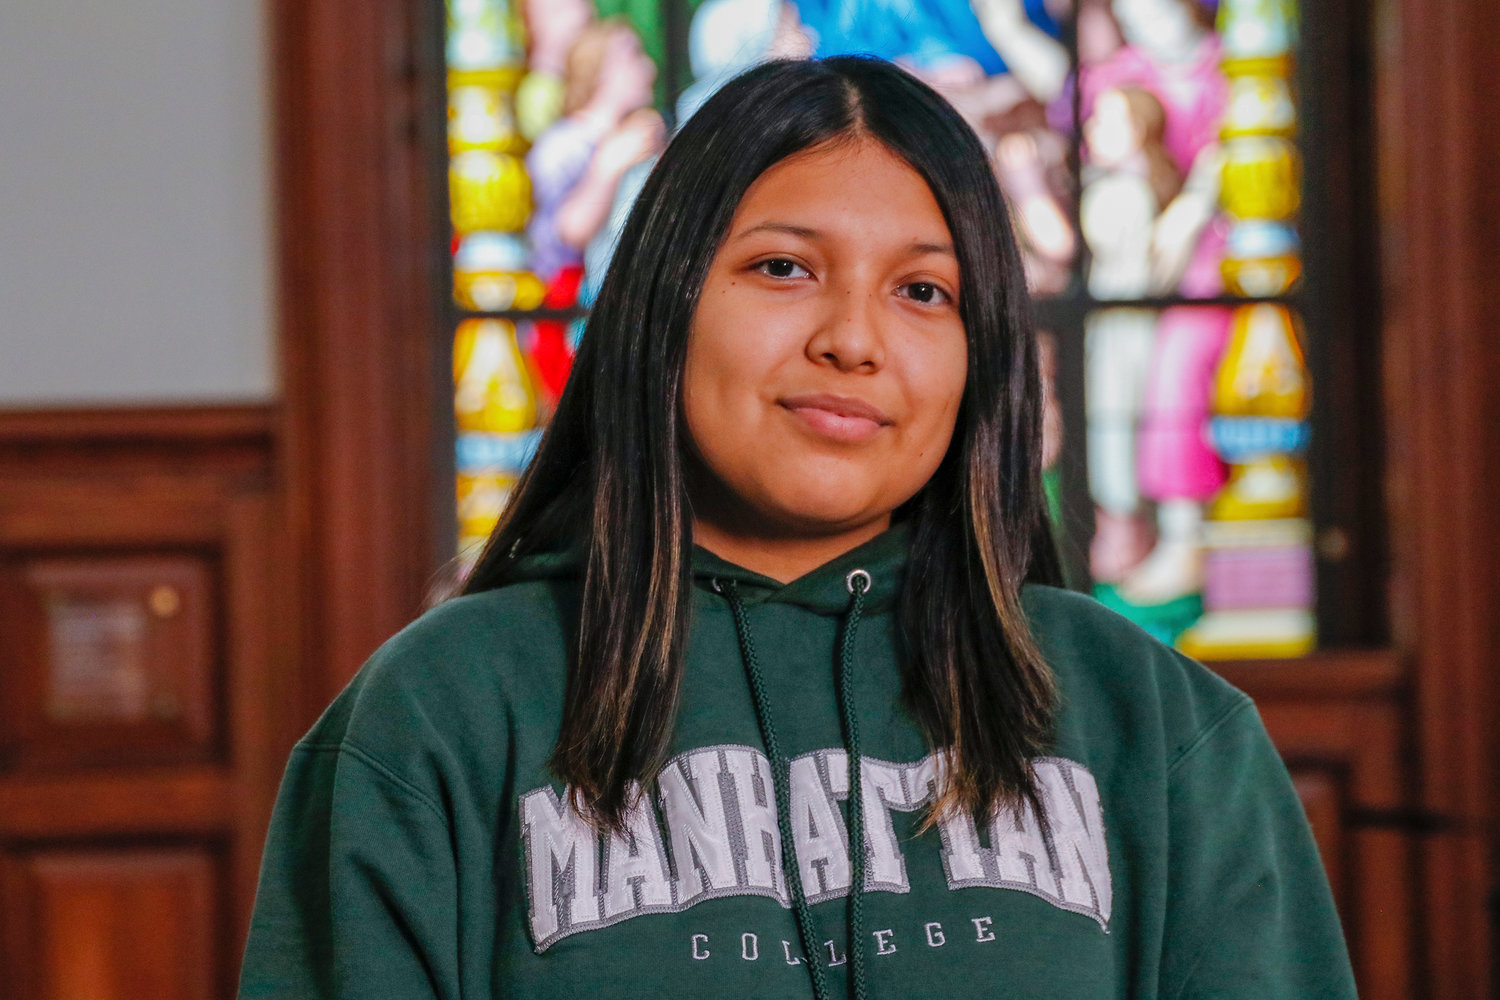 Doriz Yari a biology major at Manhattan College, was one of a small group of college students given a chance to join a video conference with Pope Francis this past week. Although the conference itself didn’t quite work out as organizers had hoped.